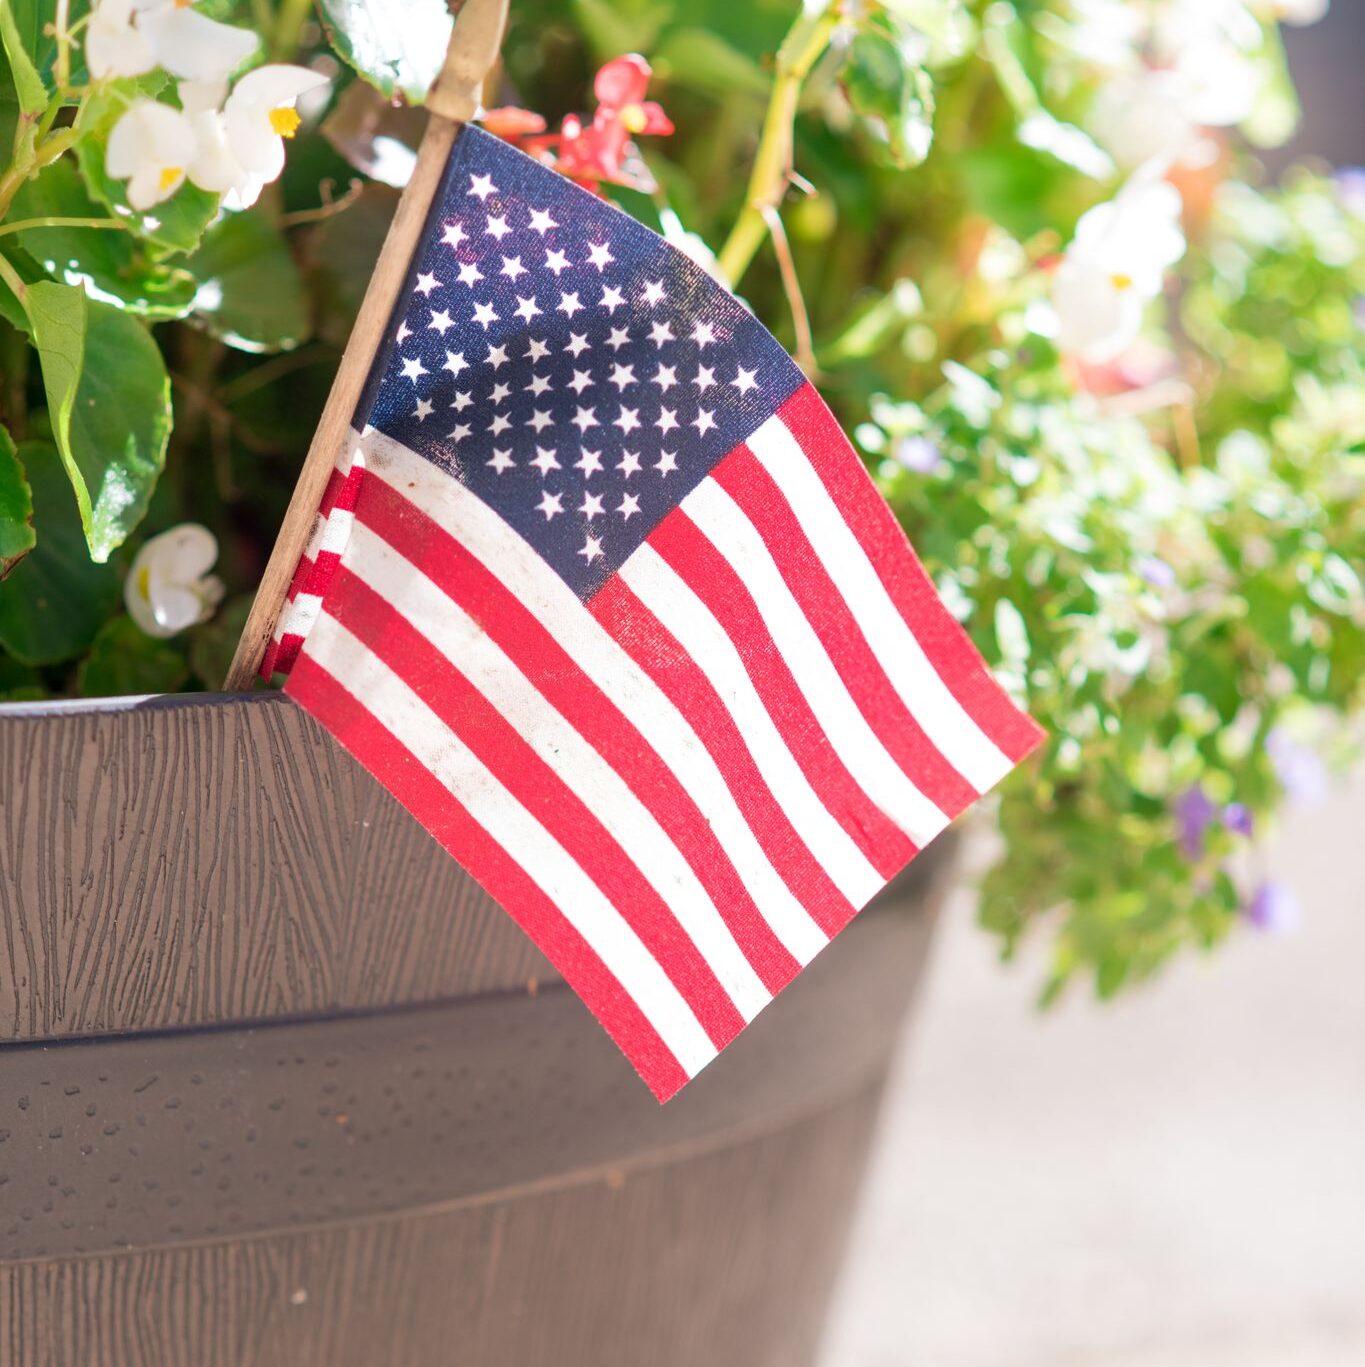 An American flag in a potted plant.